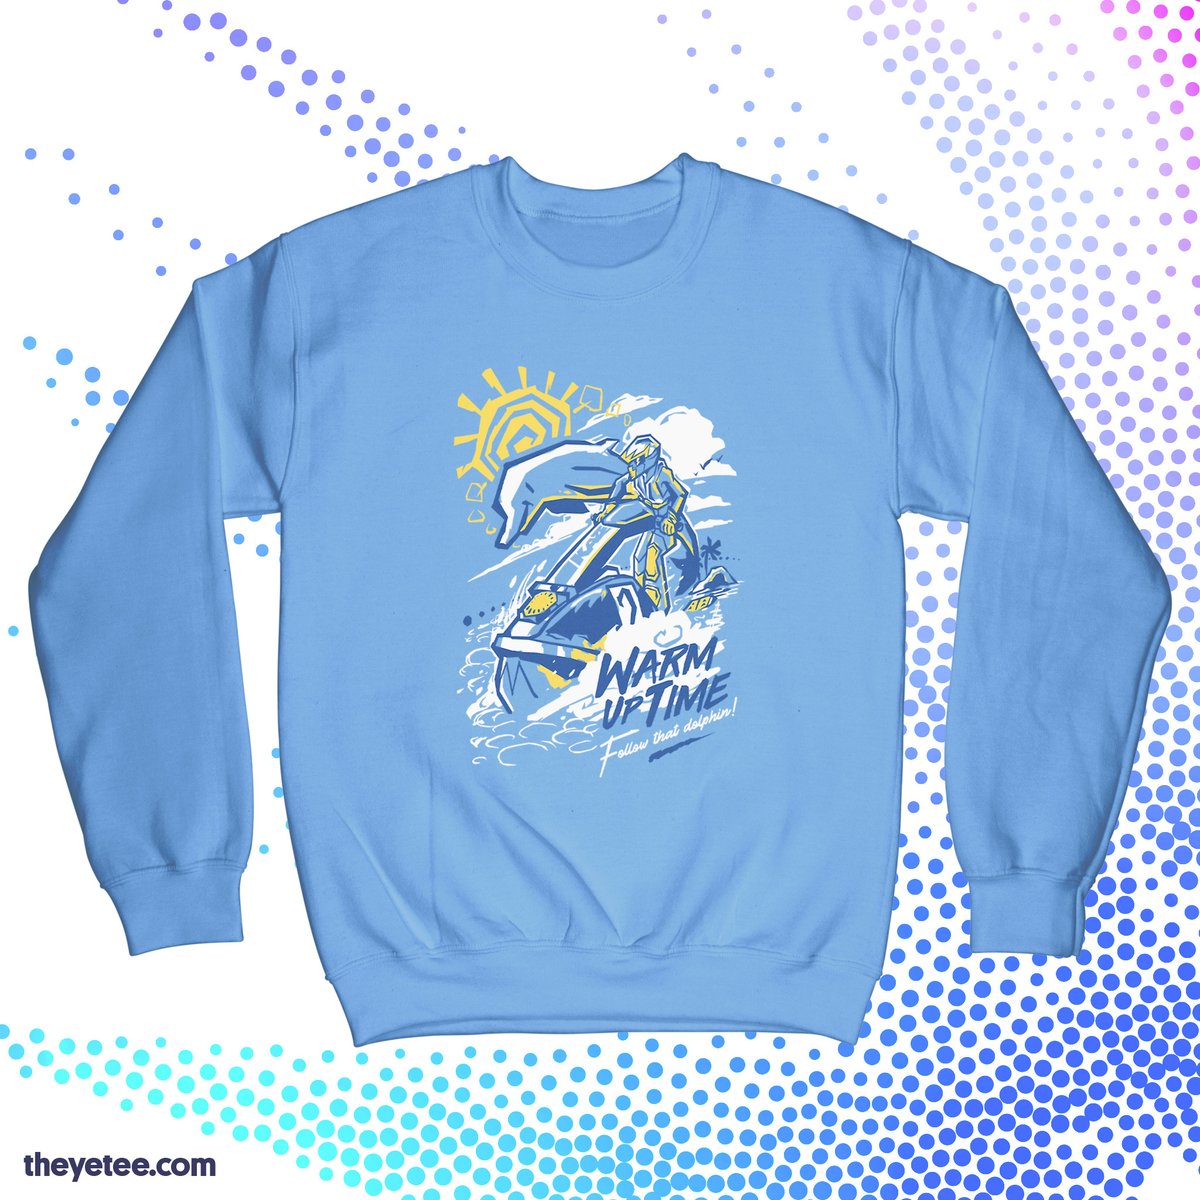 「Rev up those dolphins, racers! Designed 」|The Yetee 🌈のイラスト